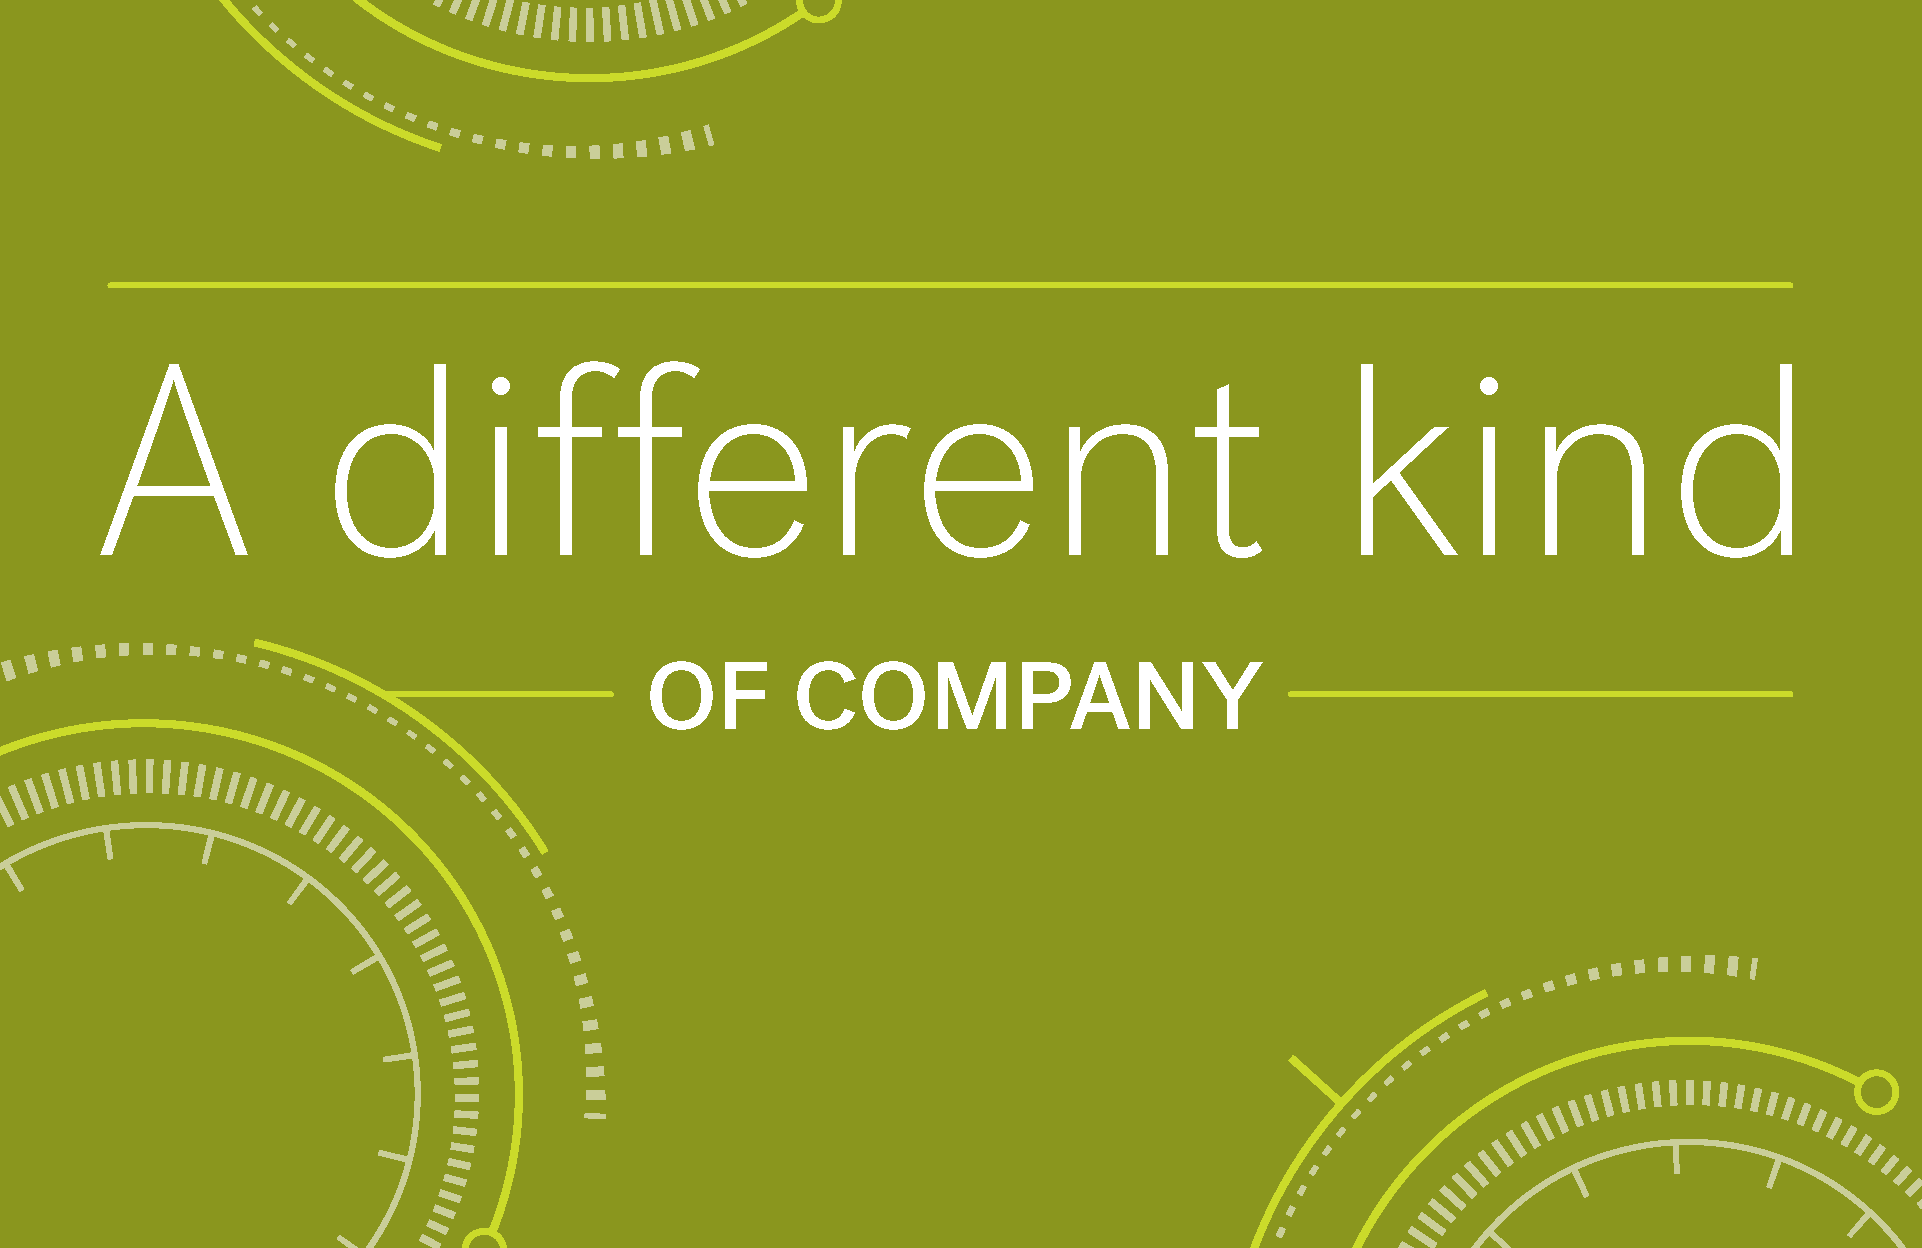 Different kind of company image